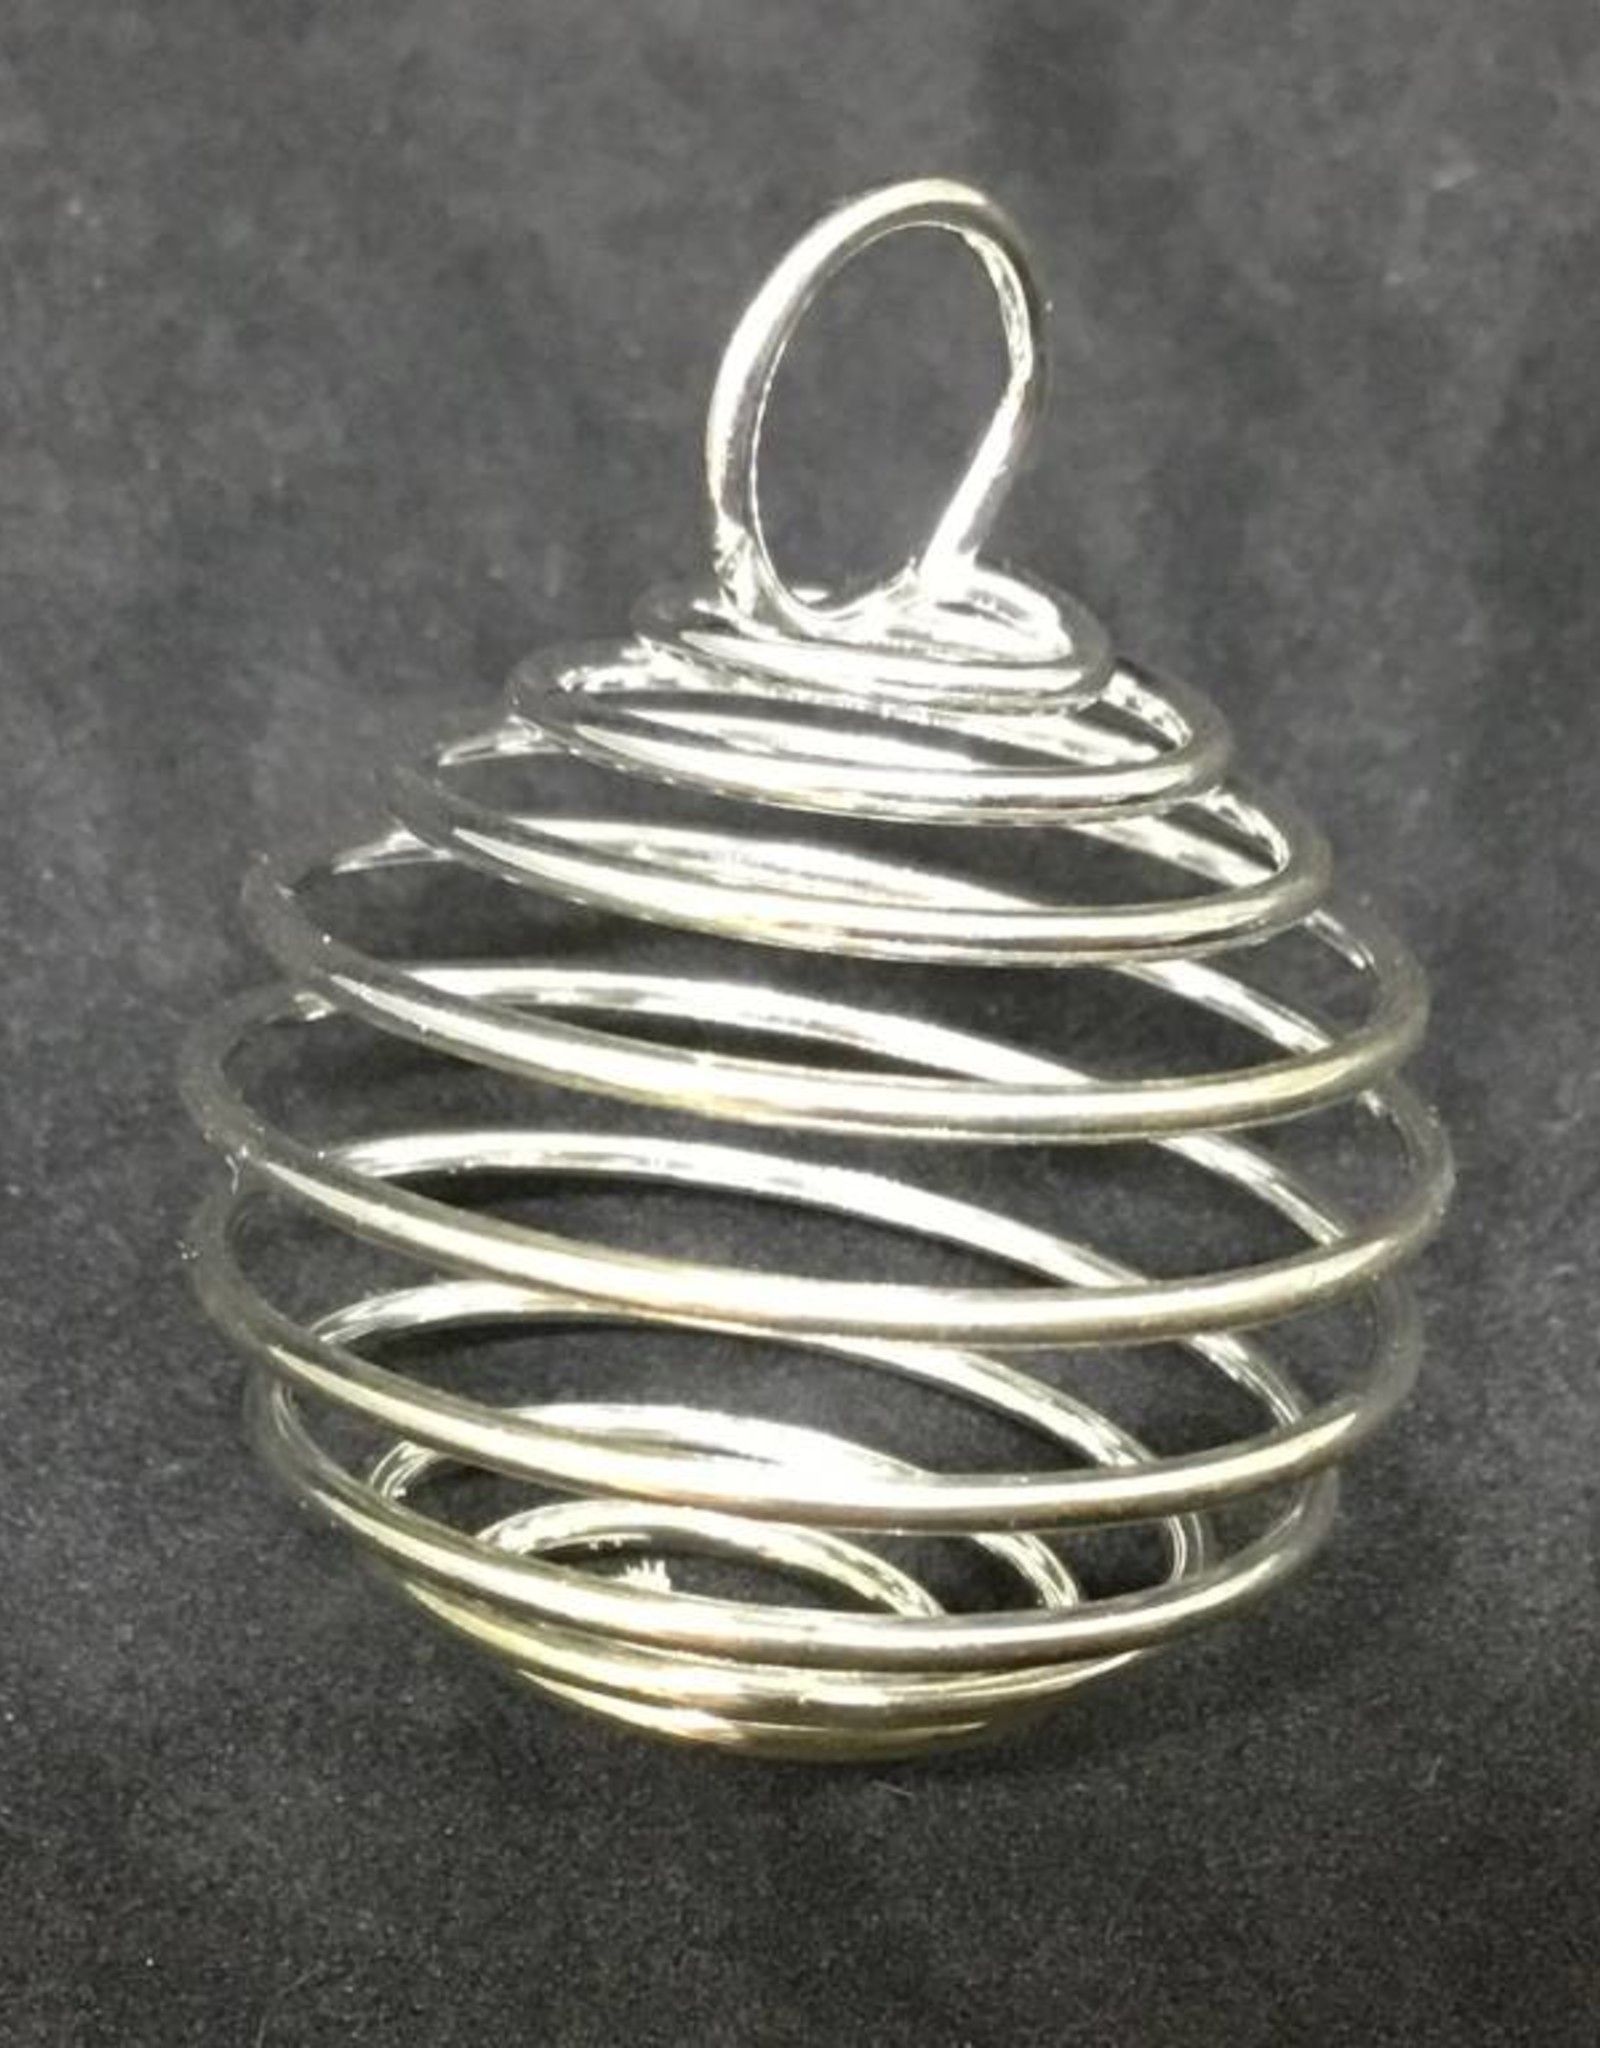 Jewelry Cages for Tumbled Stone